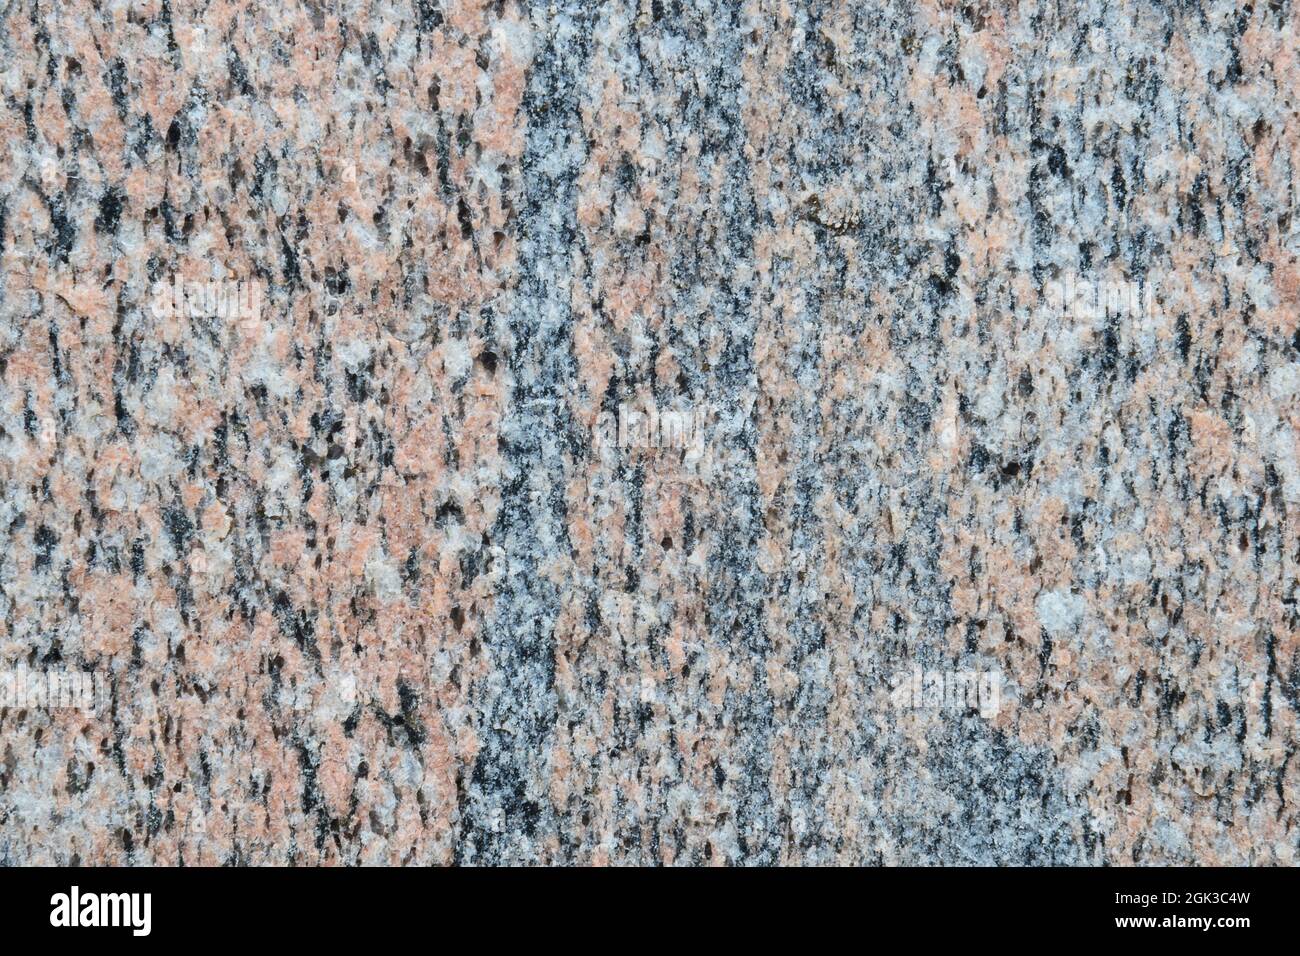 Granite. Close-up of the stucture. Crystals (feldspar, quartz, mica) clearly visible Stock Photo